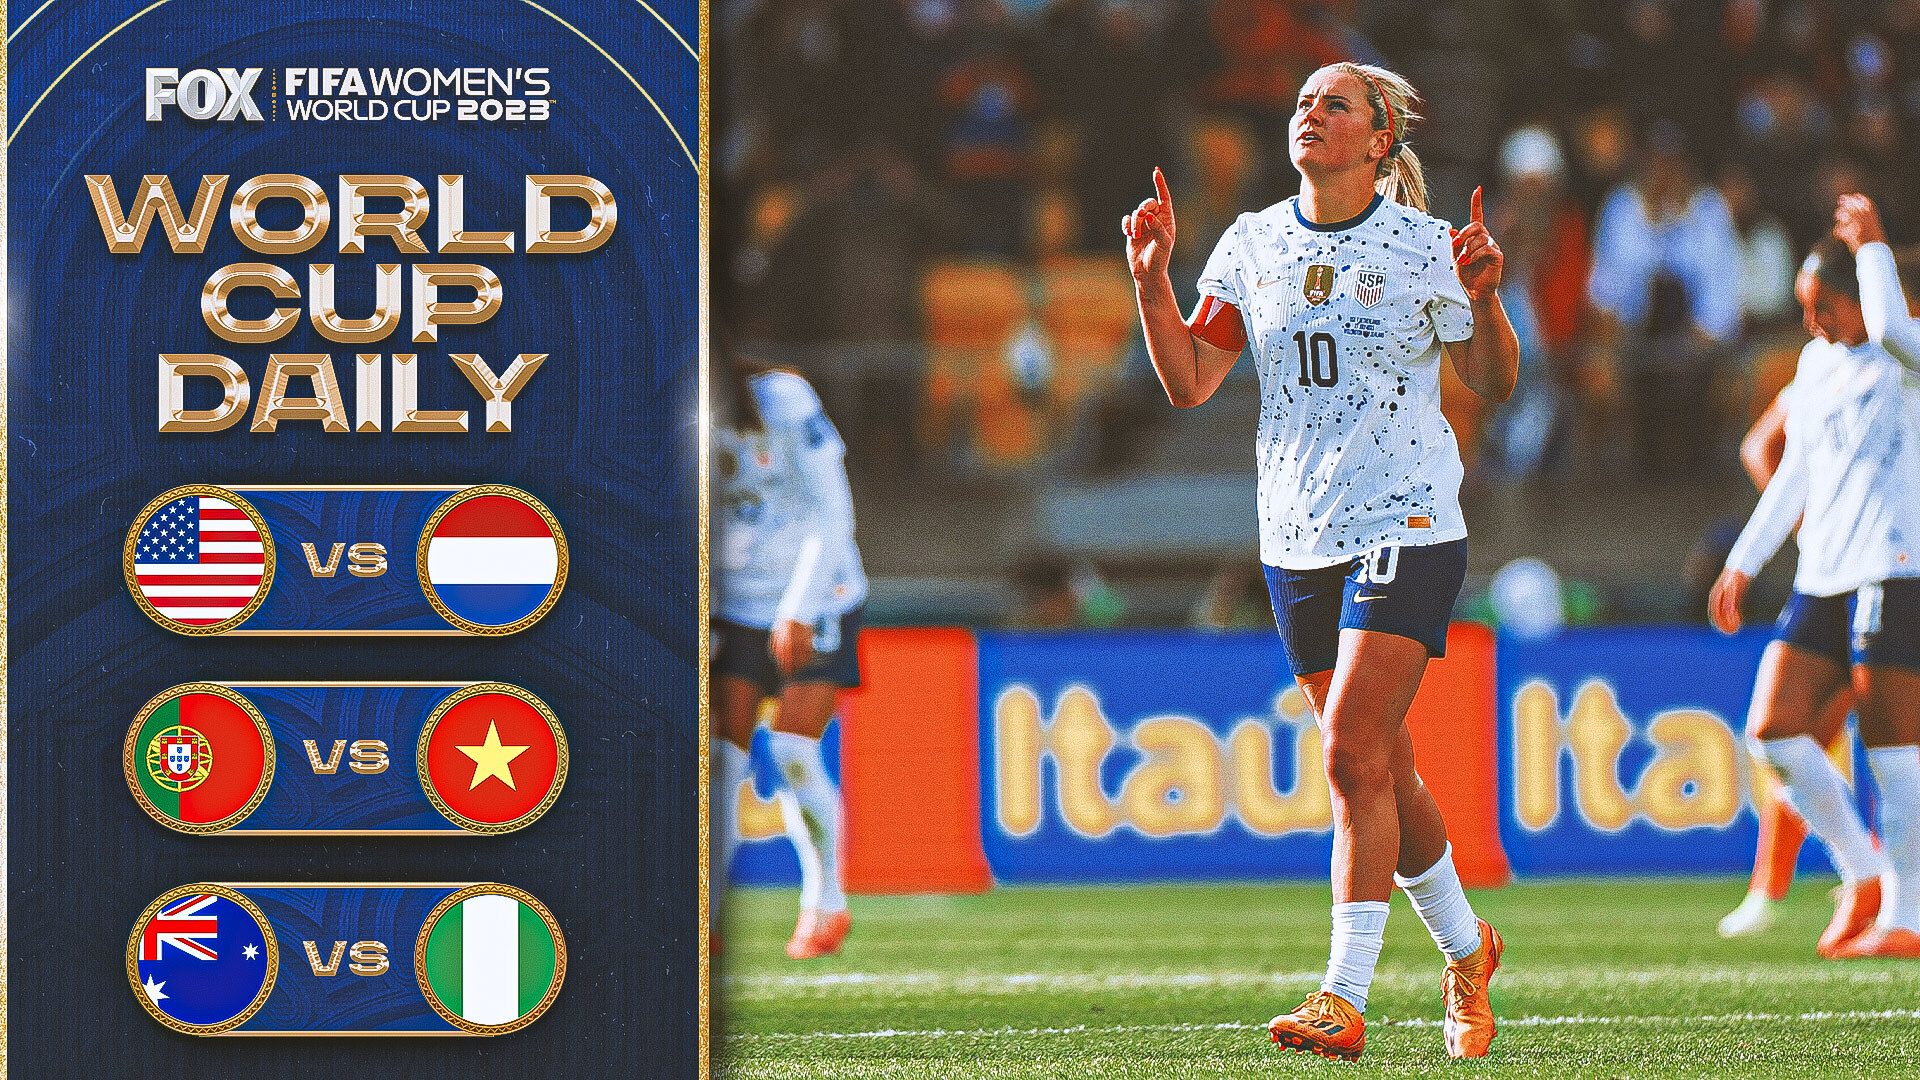 Women's World Cup Daily: USA, Netherlands set up dramatic Group E finale